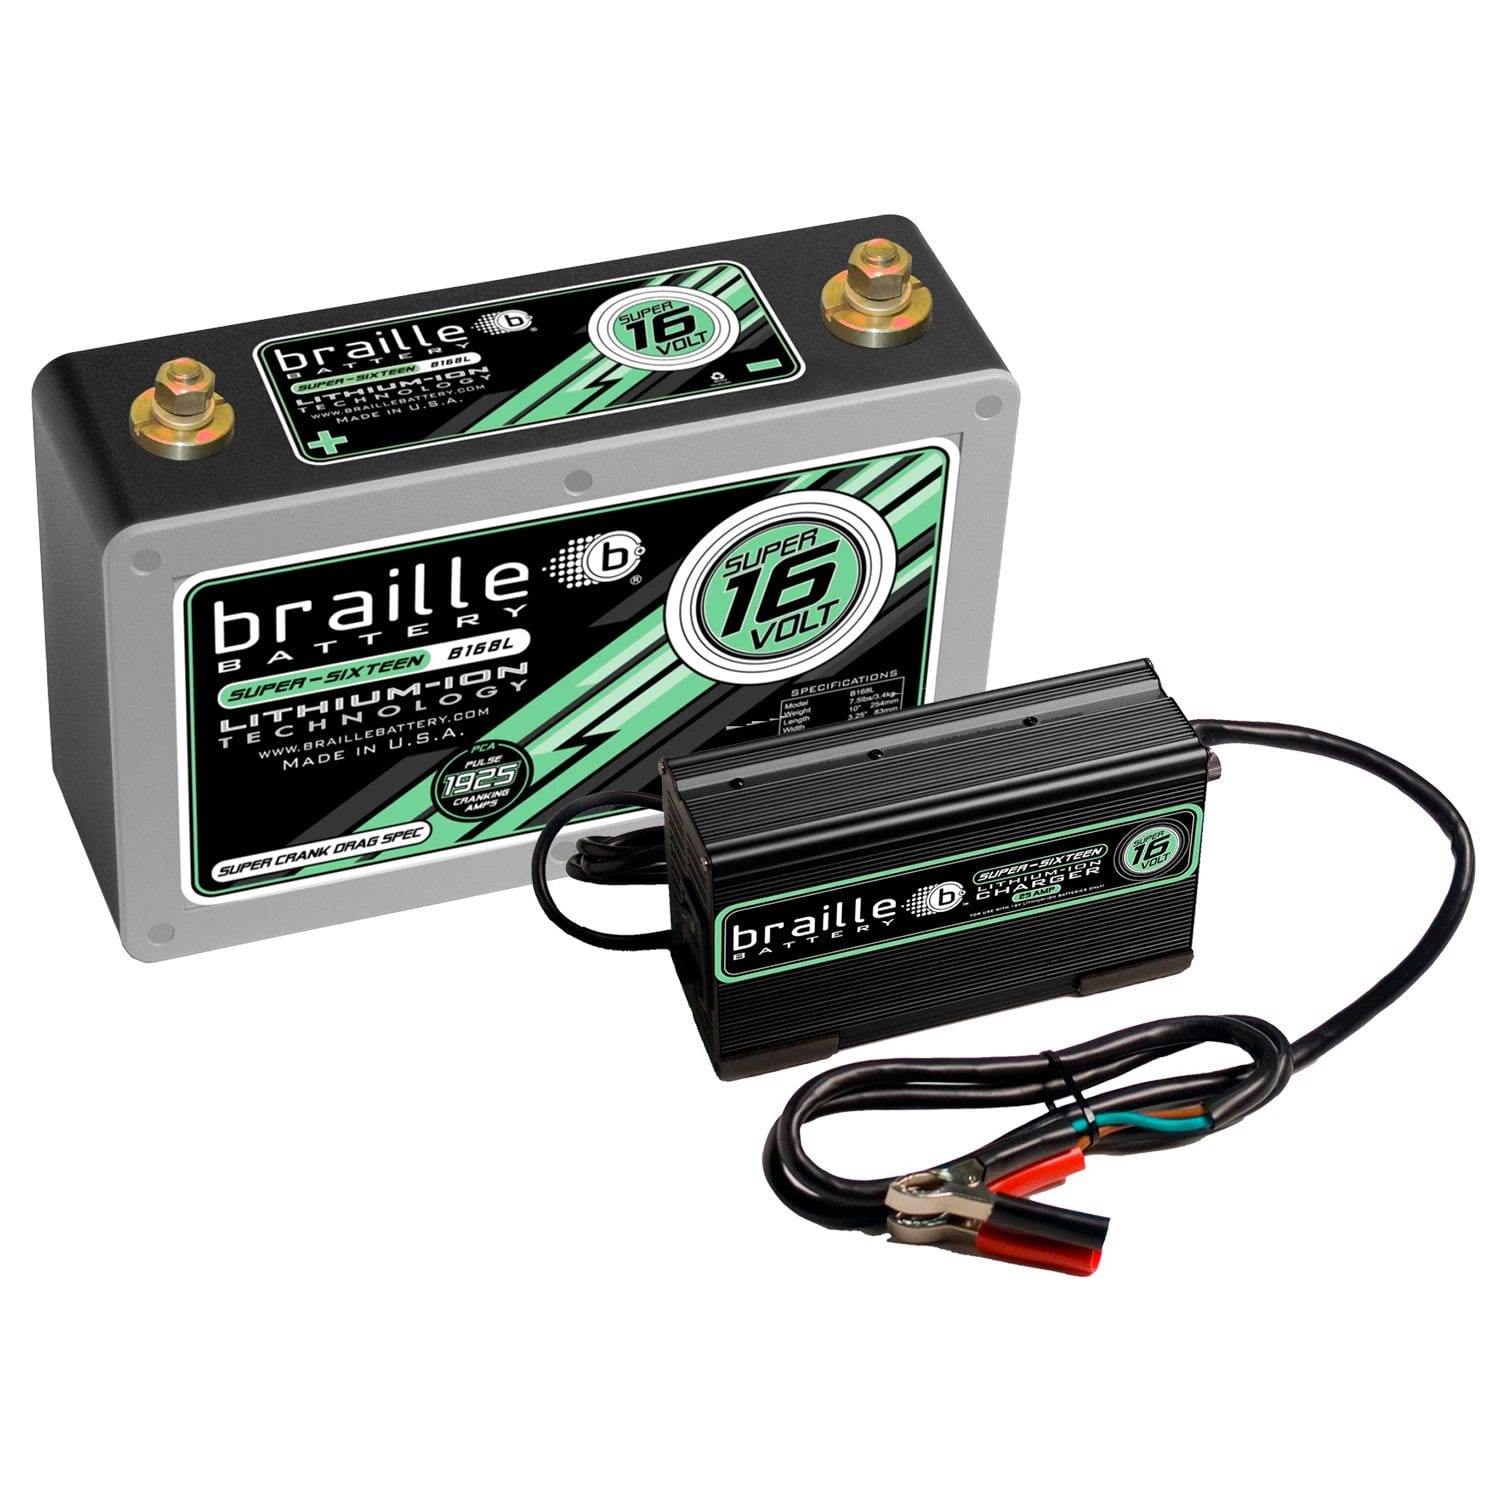 Super 16 Volt "Drag Race Spec" Lithium Battery and Rapid Charger Combo